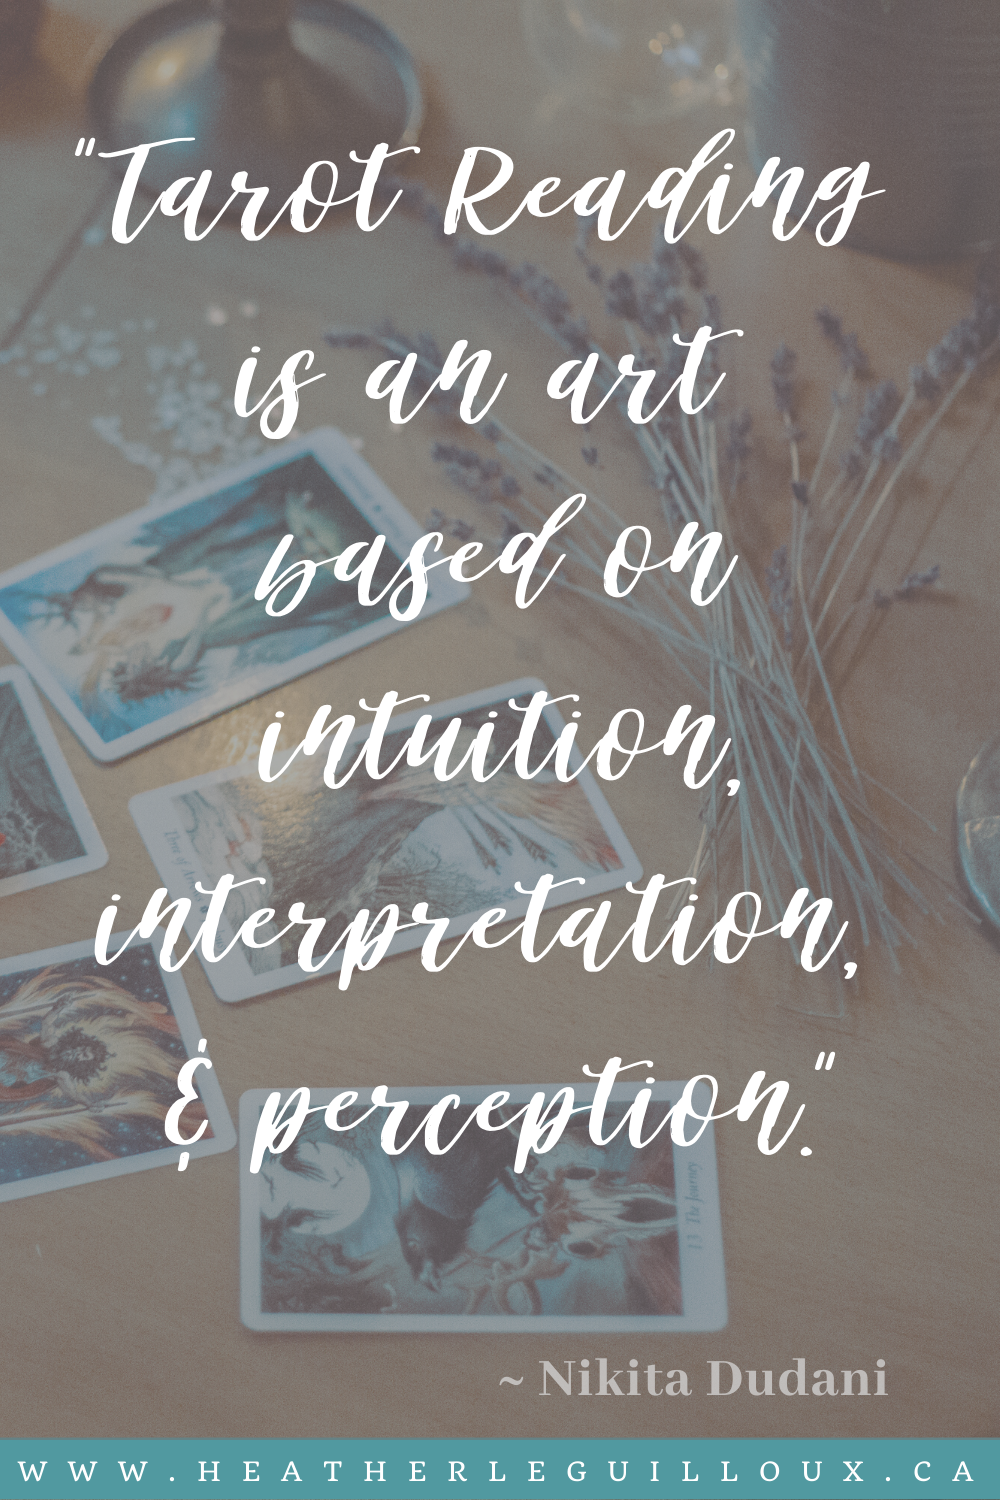 Interested in learning more about oracle or tarot reading? Congratulate yourself on taking a step towards exploring your inner self further in a way perhaps you have yet to open up yet. The possibilities of teachings and insight that you can gain is limitless, as long as you are open to receive the energy and intuition that the cards can bring to you. #art #intuition #interpretation #perception #oraclecards #tarotreading